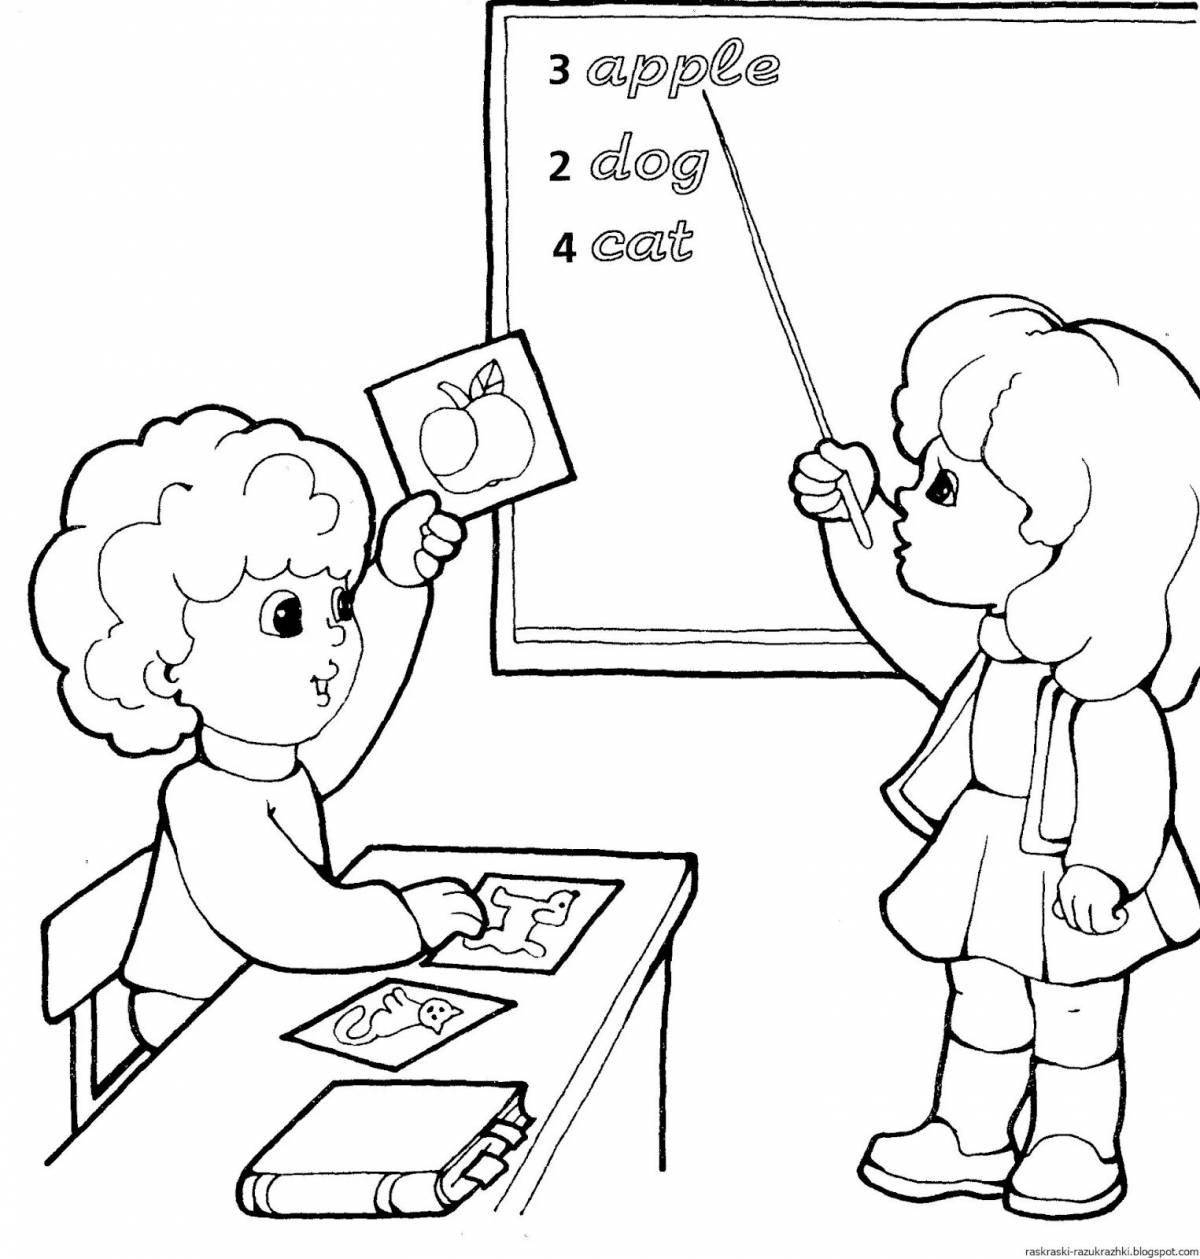 1st grade playful coloring page